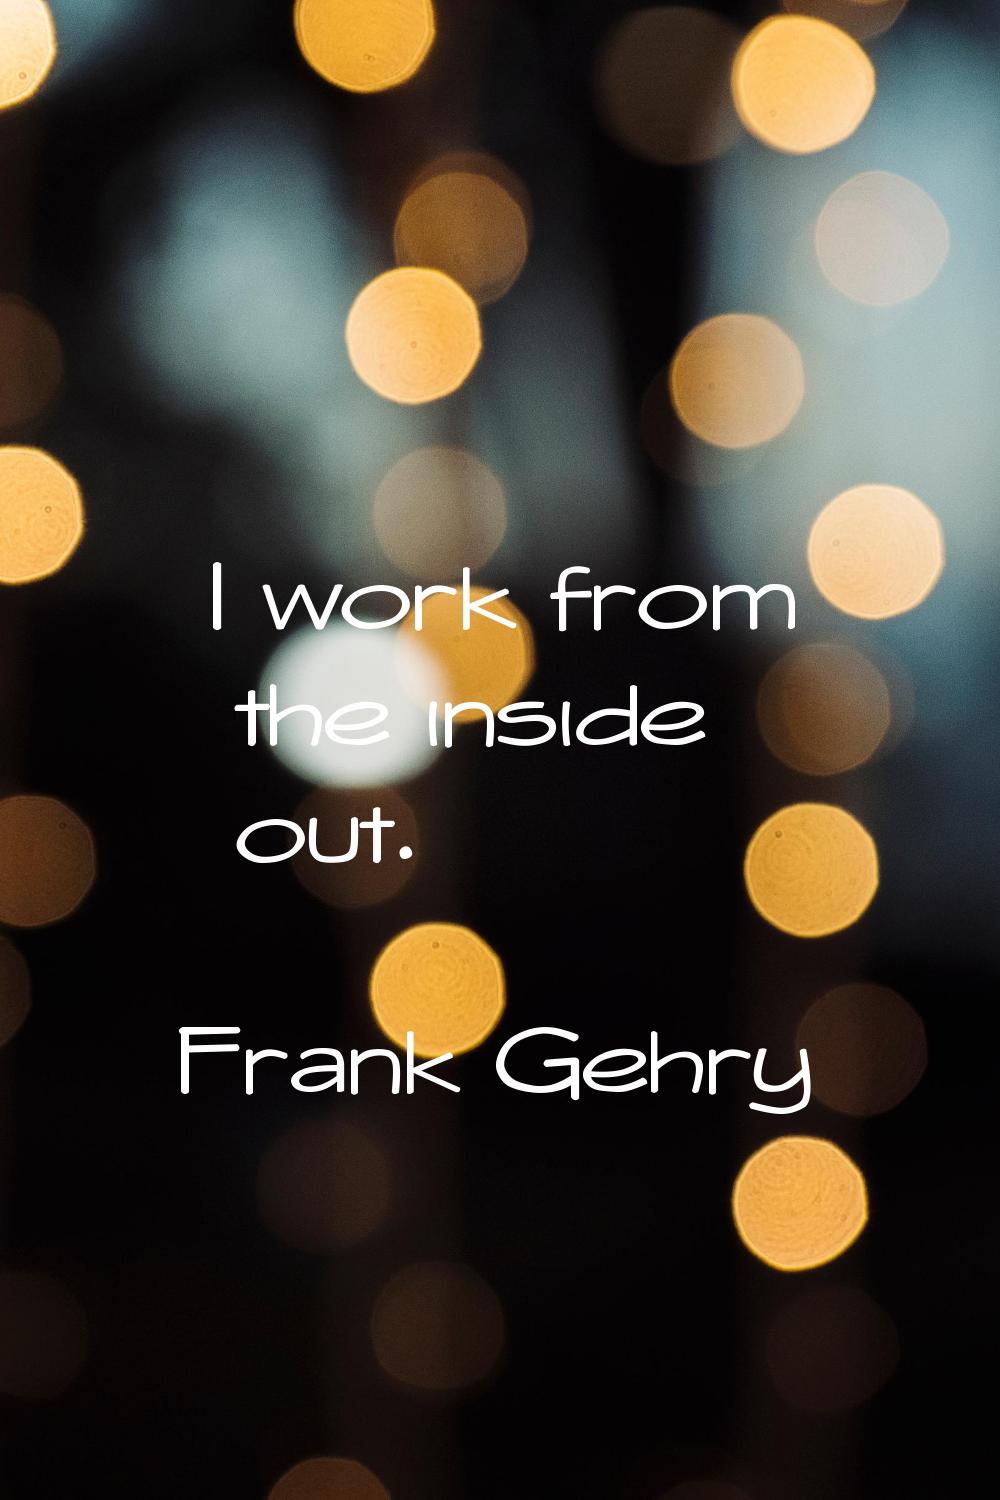 I work from the inside out.